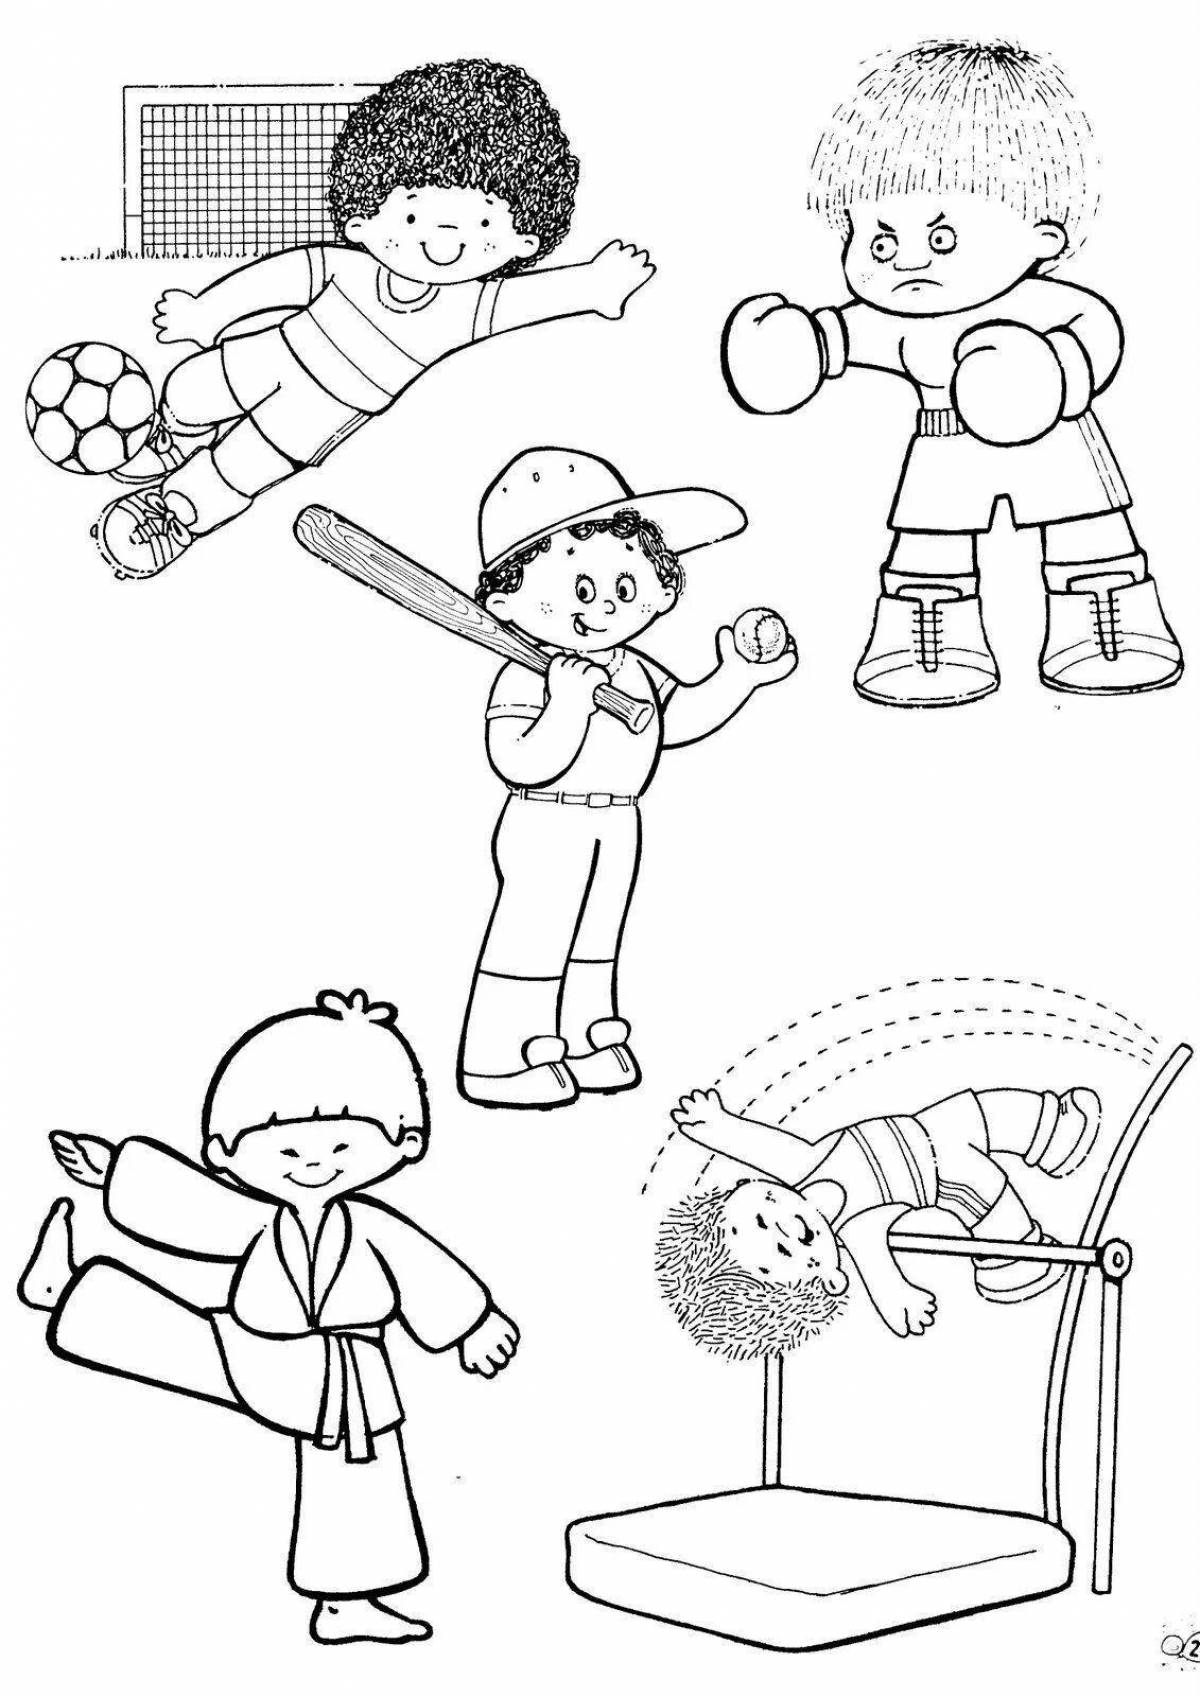 Entertaining sports coloring book for children 6-7 years old